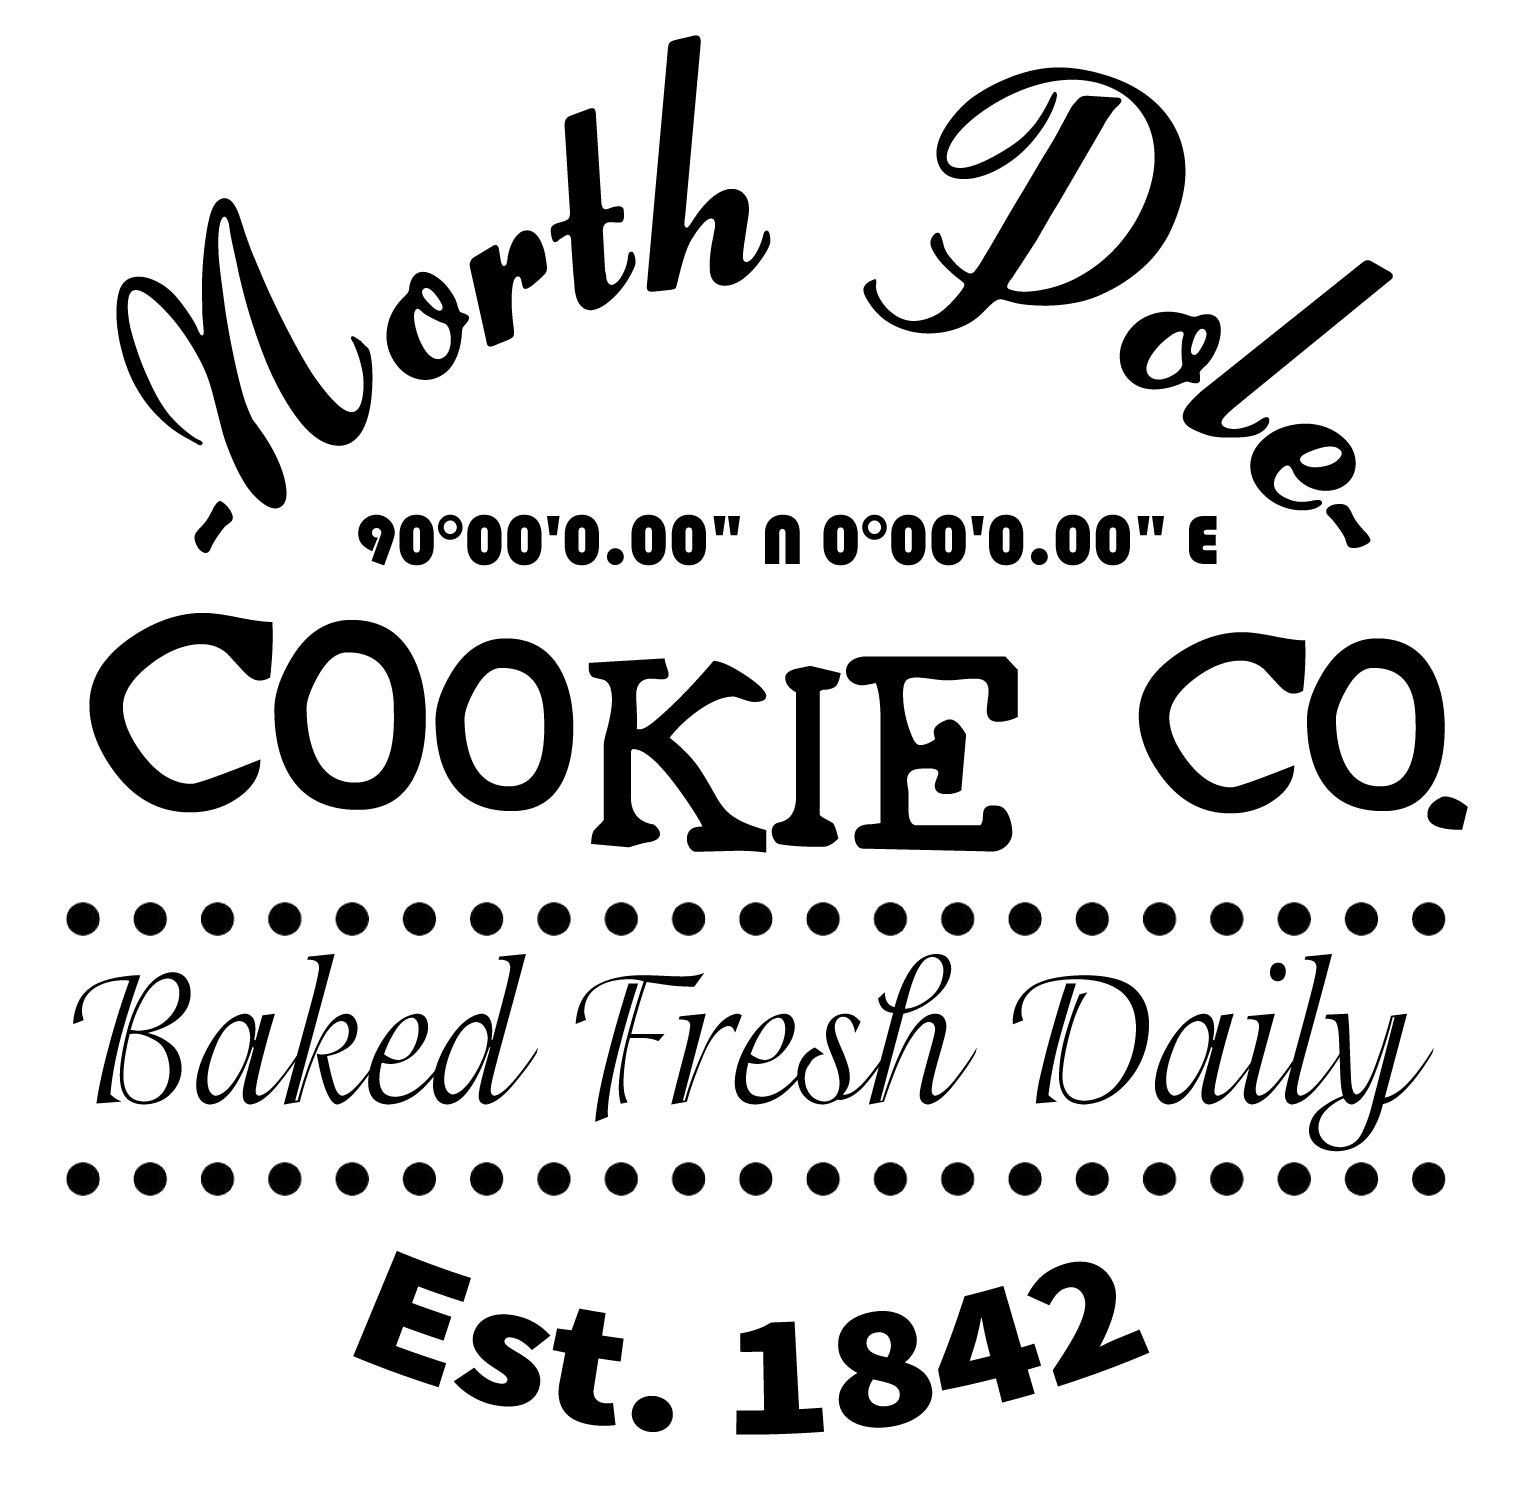 North Pole Cookie Co. SVG File for the Cricut